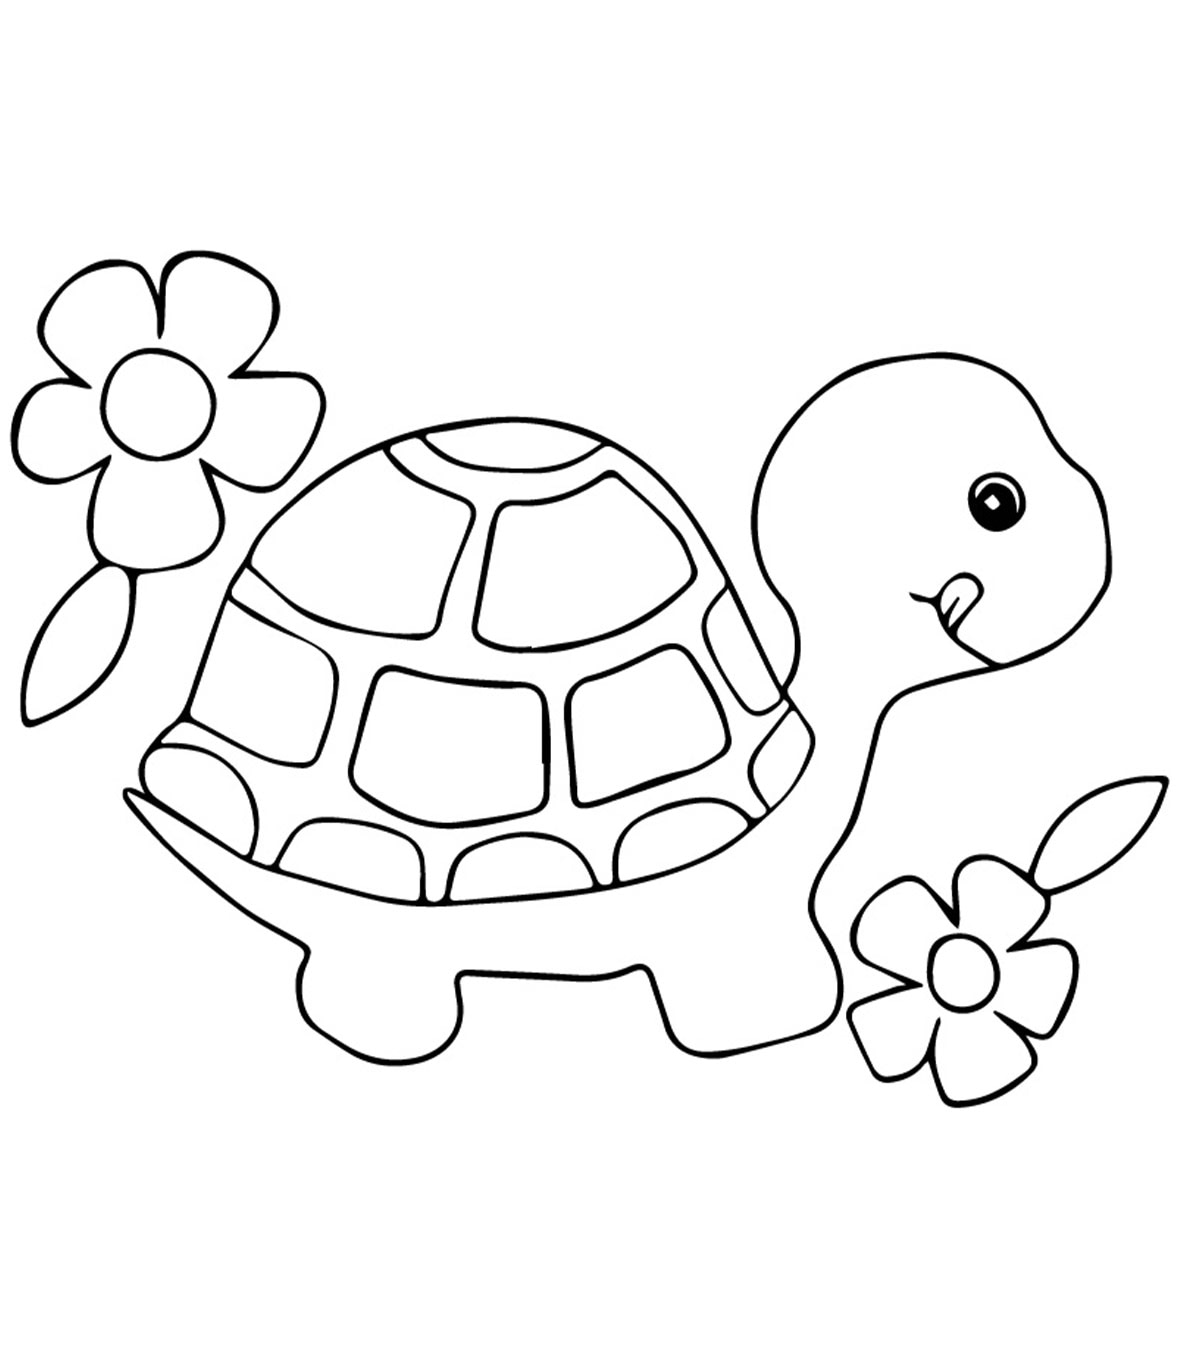 Animal Coloring Pages - MomJunction1200 x 1350